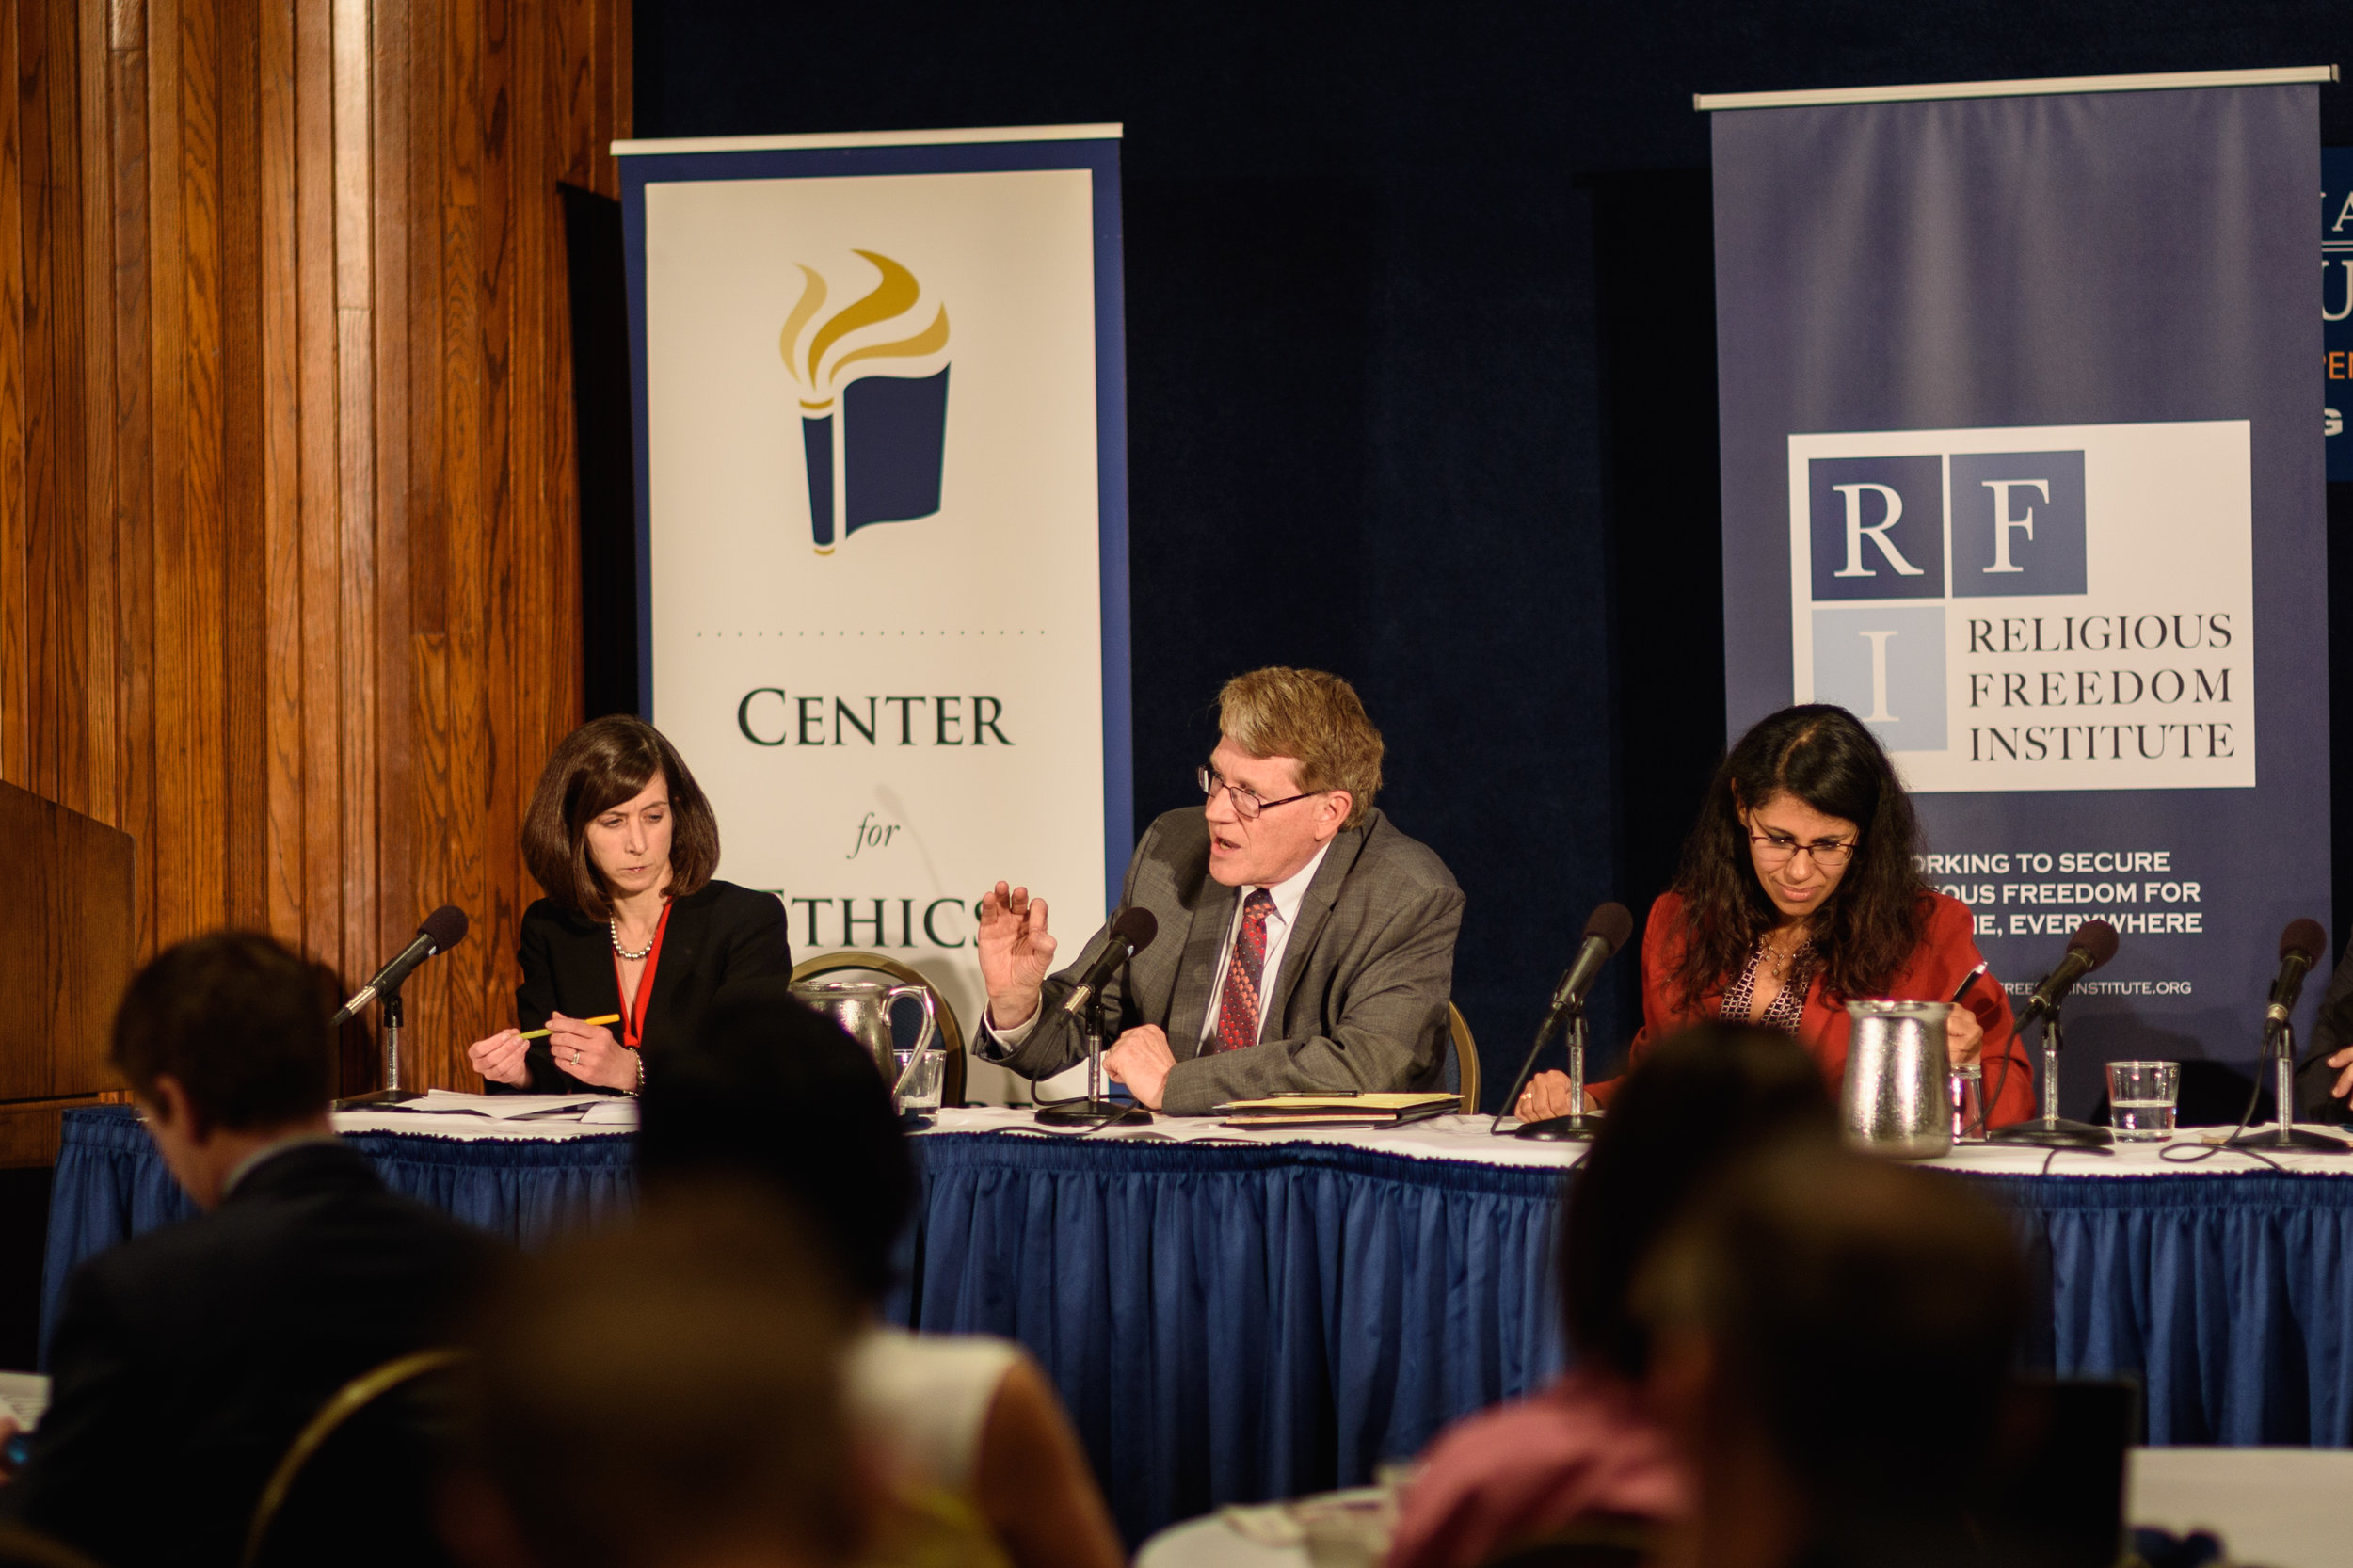 Panel: “Responding to the Persecution of Christians in the Middle East and Central Asia”